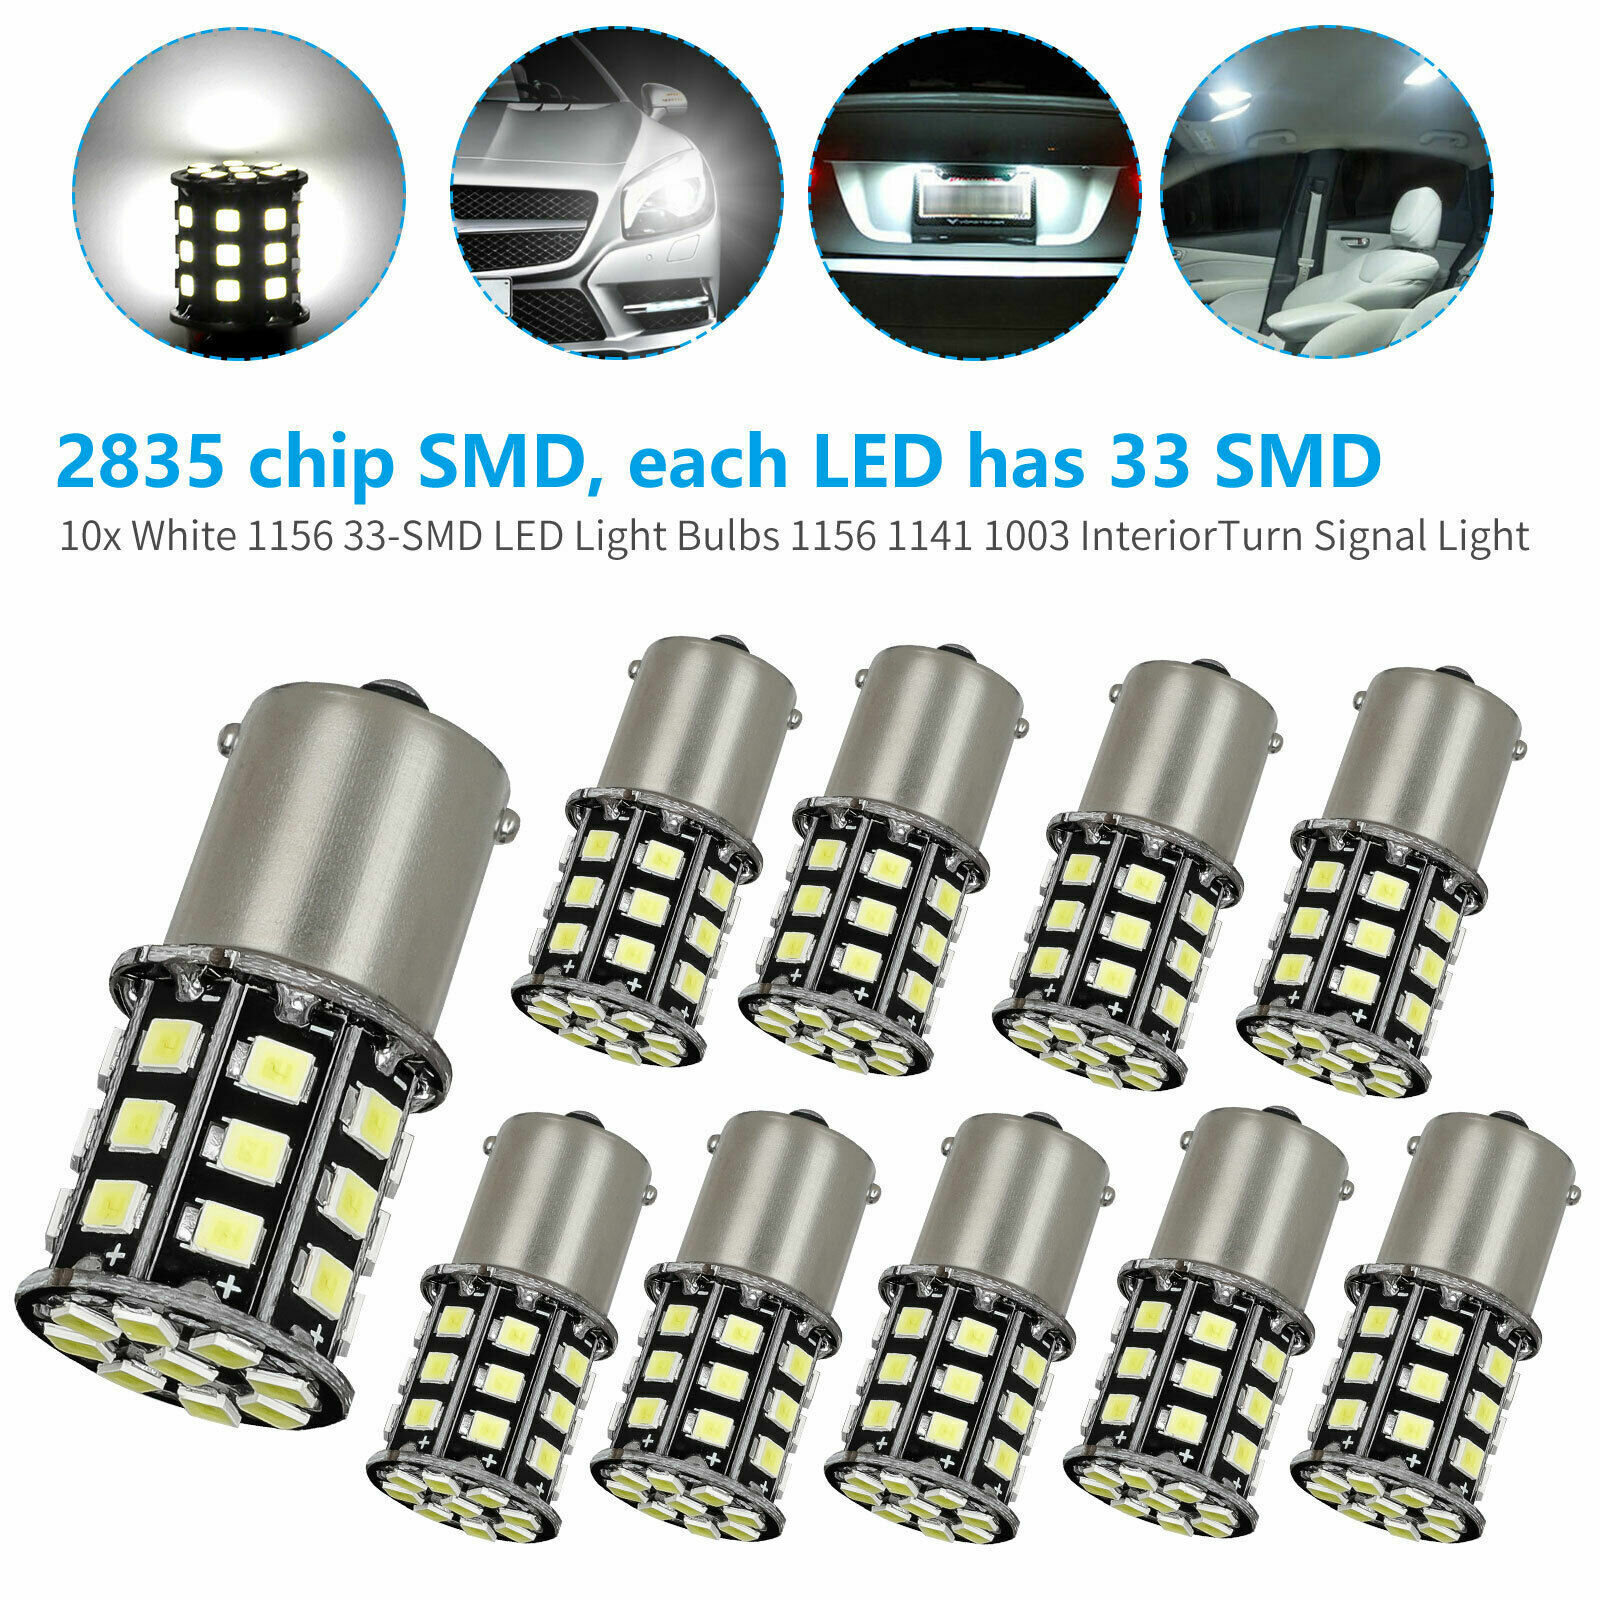 10x Super Bright White 1156 RV Trailer 33-SMD Car LED 1141 Interior Light Bulbs ANYHOW Does Not Apply - фотография #5